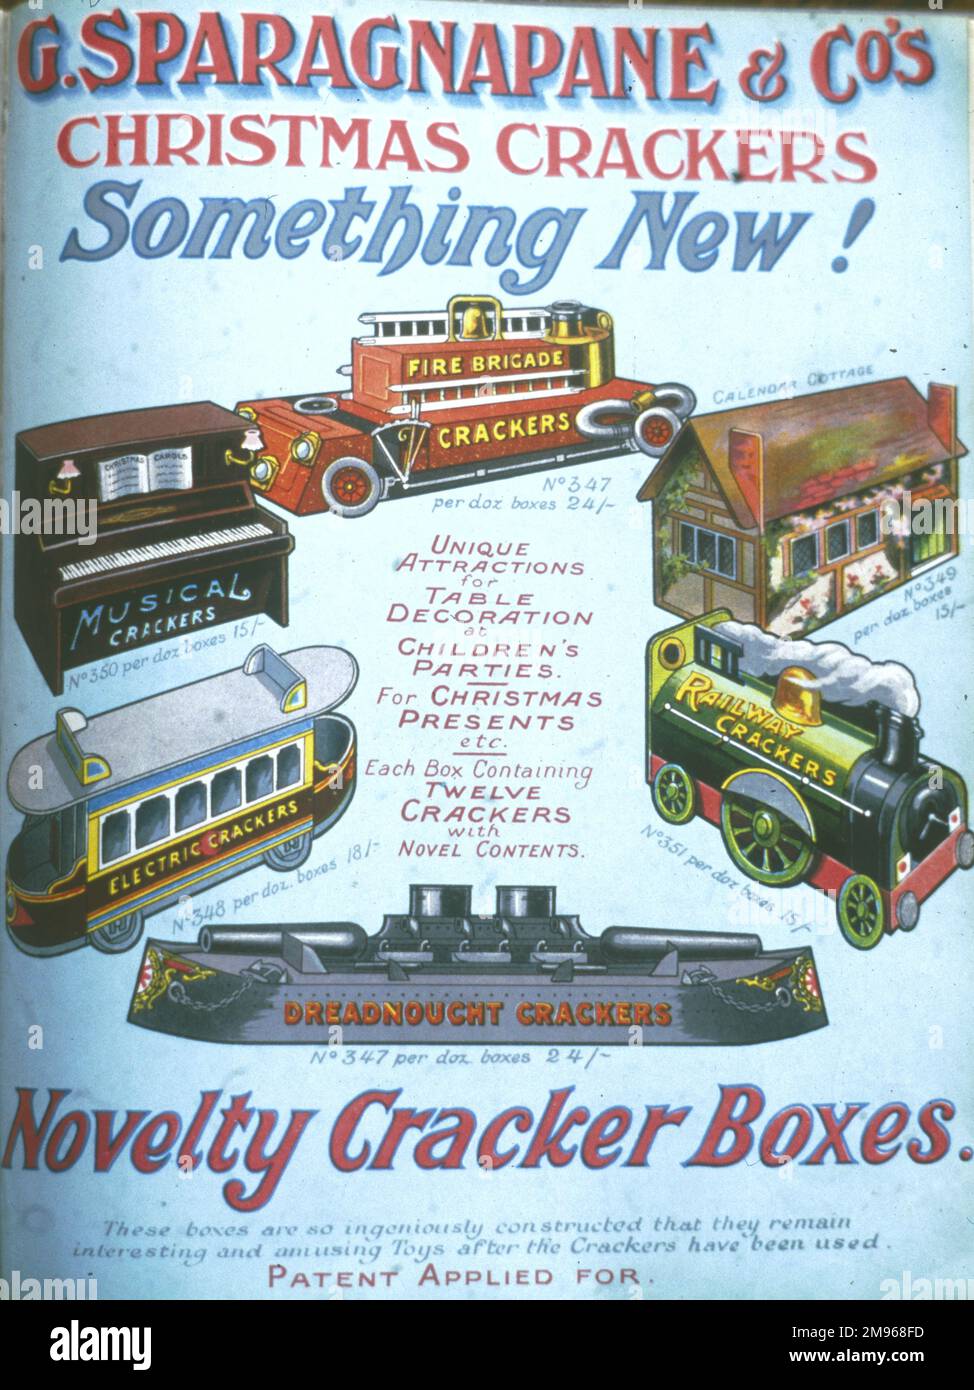 Page from a catalogue advertising the various ingenious novelty Christmas cracker boxes available from G Sparagnapane and Co in the form of a piano, cottage, tram, submarine, train and fire engine. Stock Photo